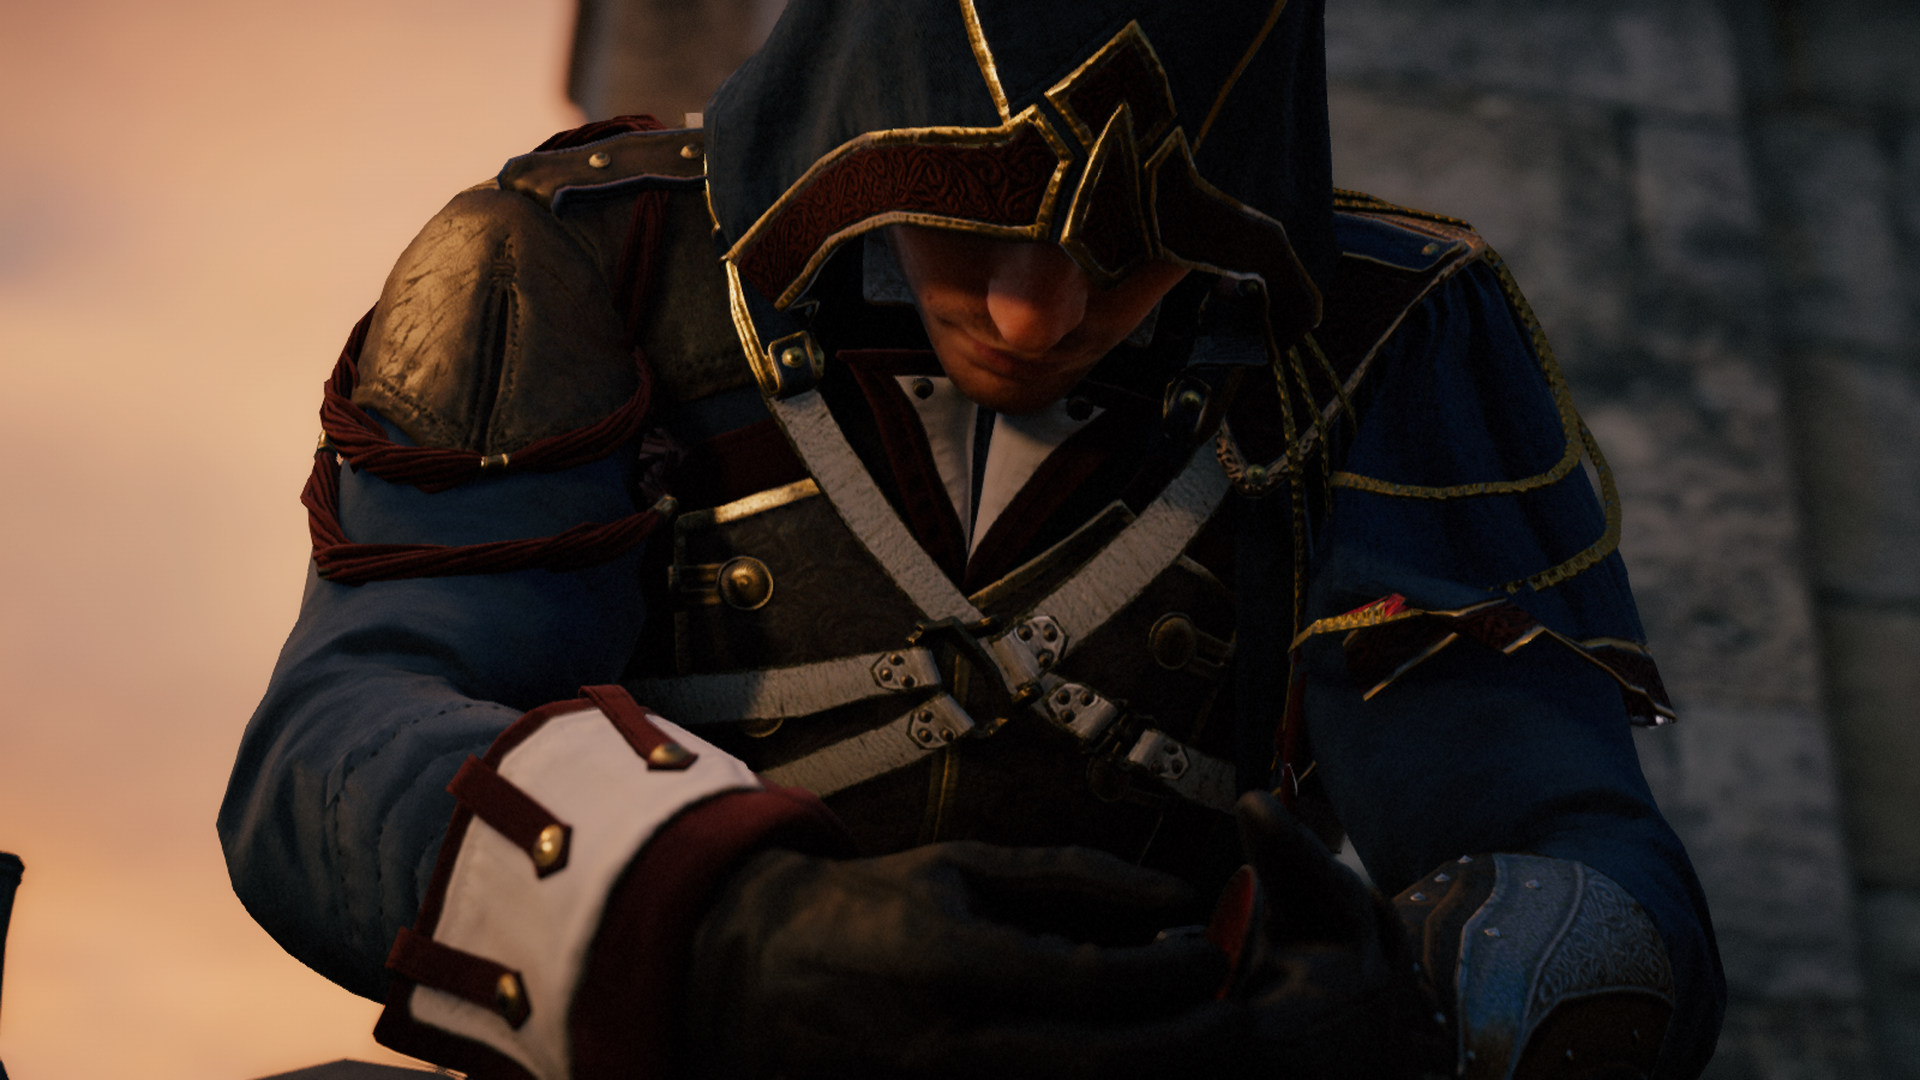 General 1920x1080 video games Assassin's Creed Assassin's Creed:  Unity Assassin's Creed Unity: Dead Kings PC gaming screen shot